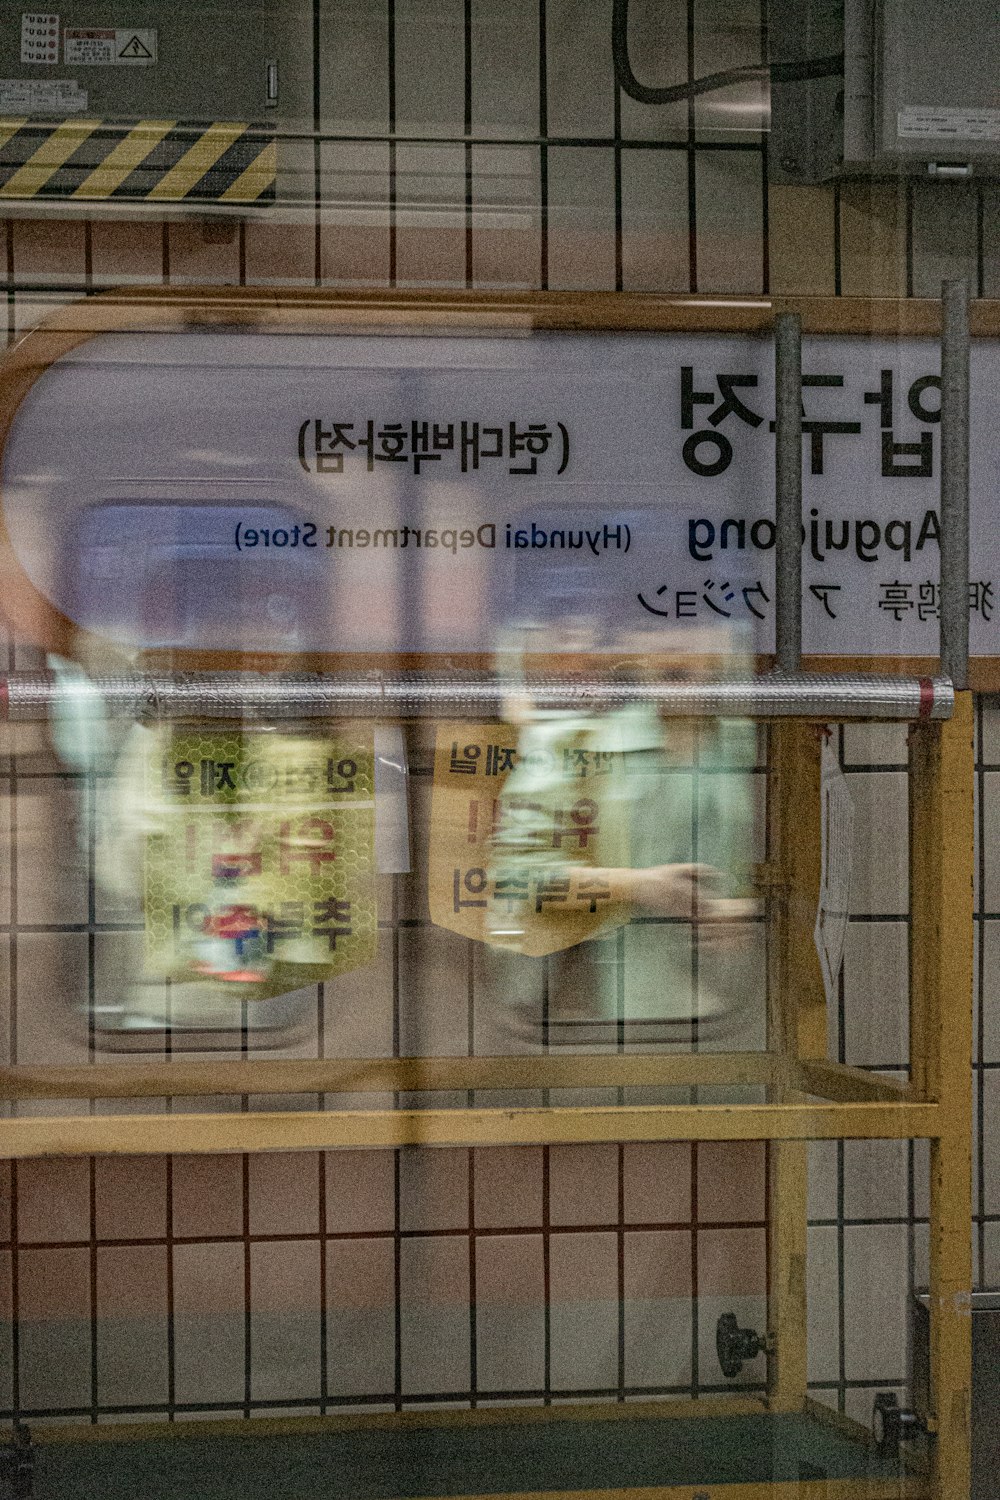 a subway station with a sign that says it is open